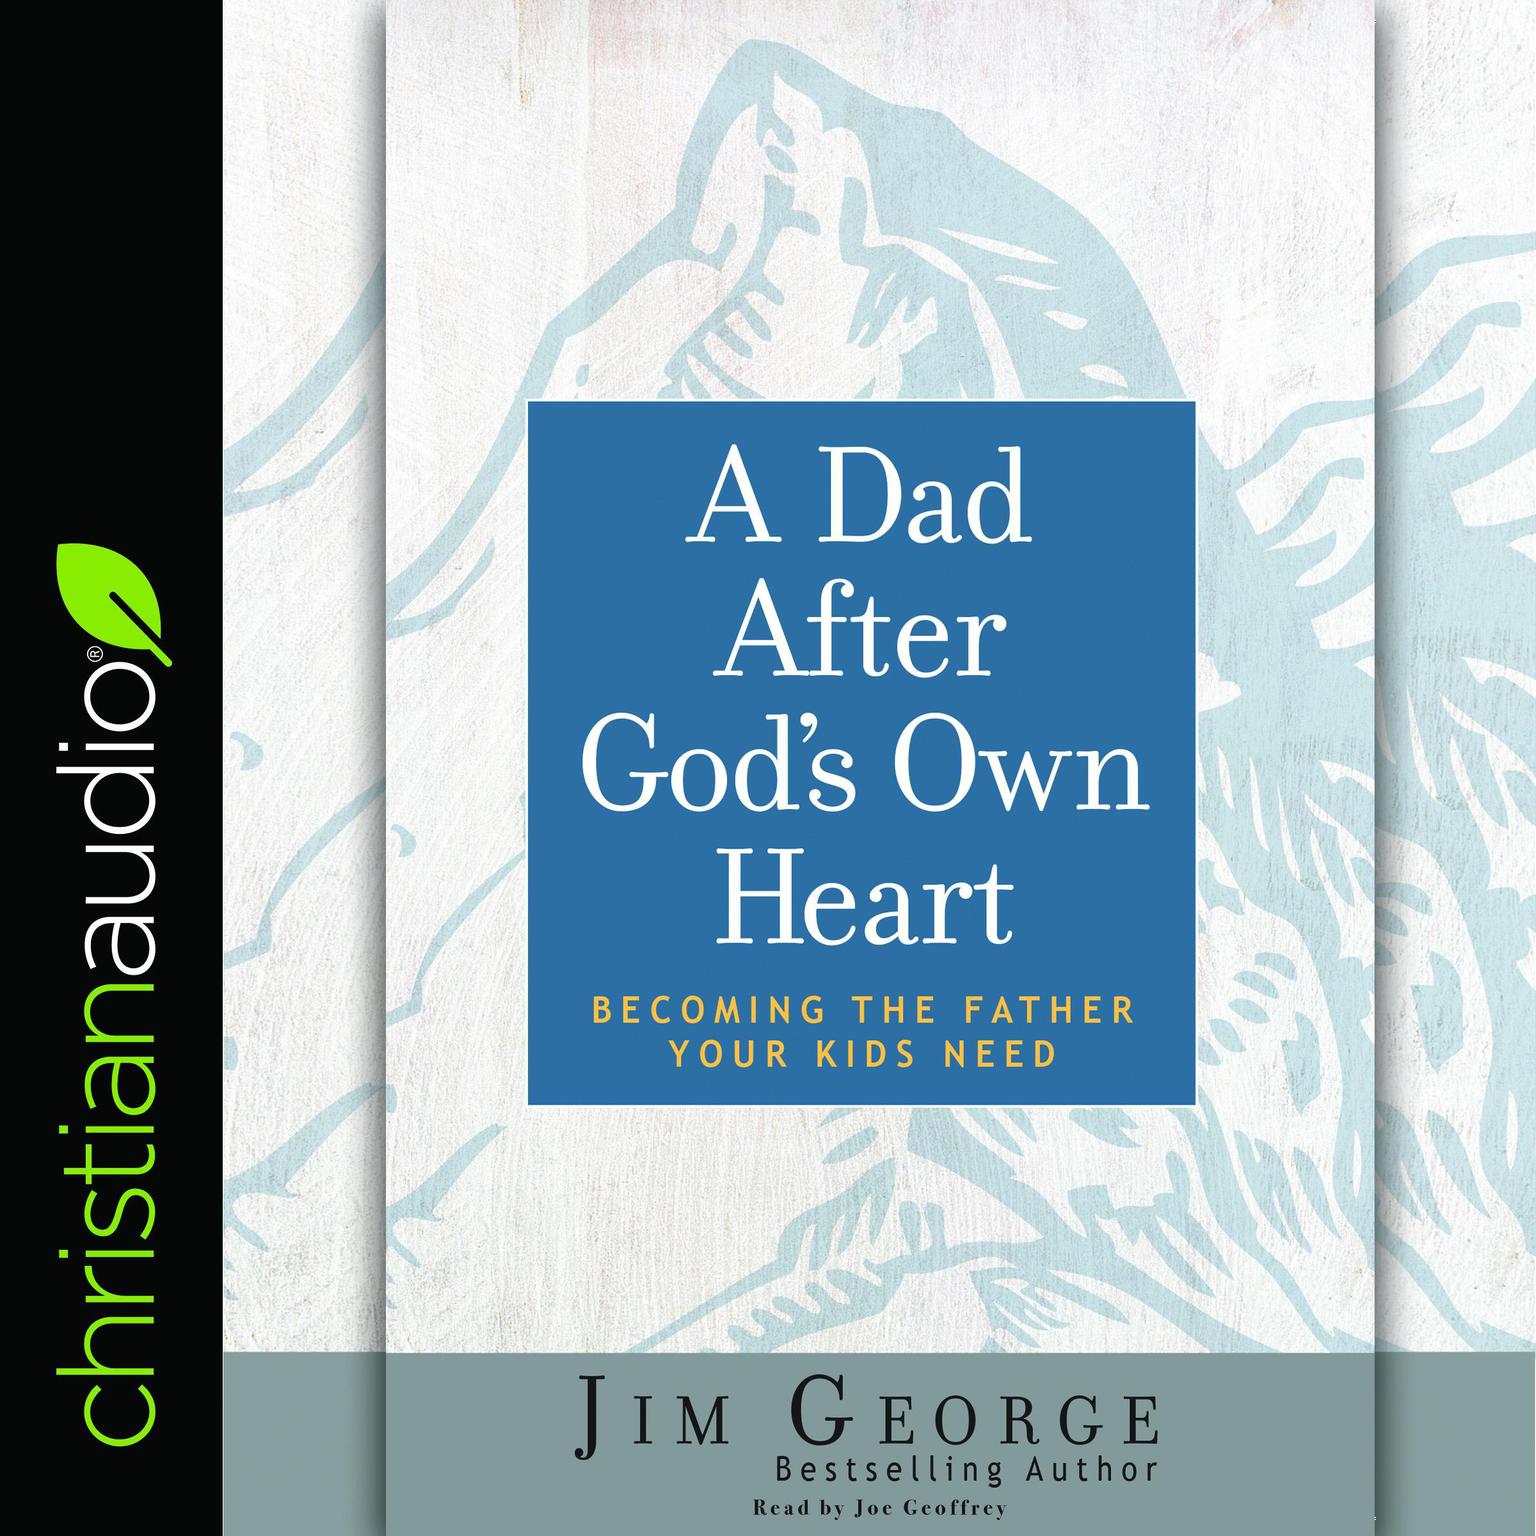 Dad After Gods Own Heart (Abridged): Becoming the Father Your Kids Need Audiobook, by Jim George